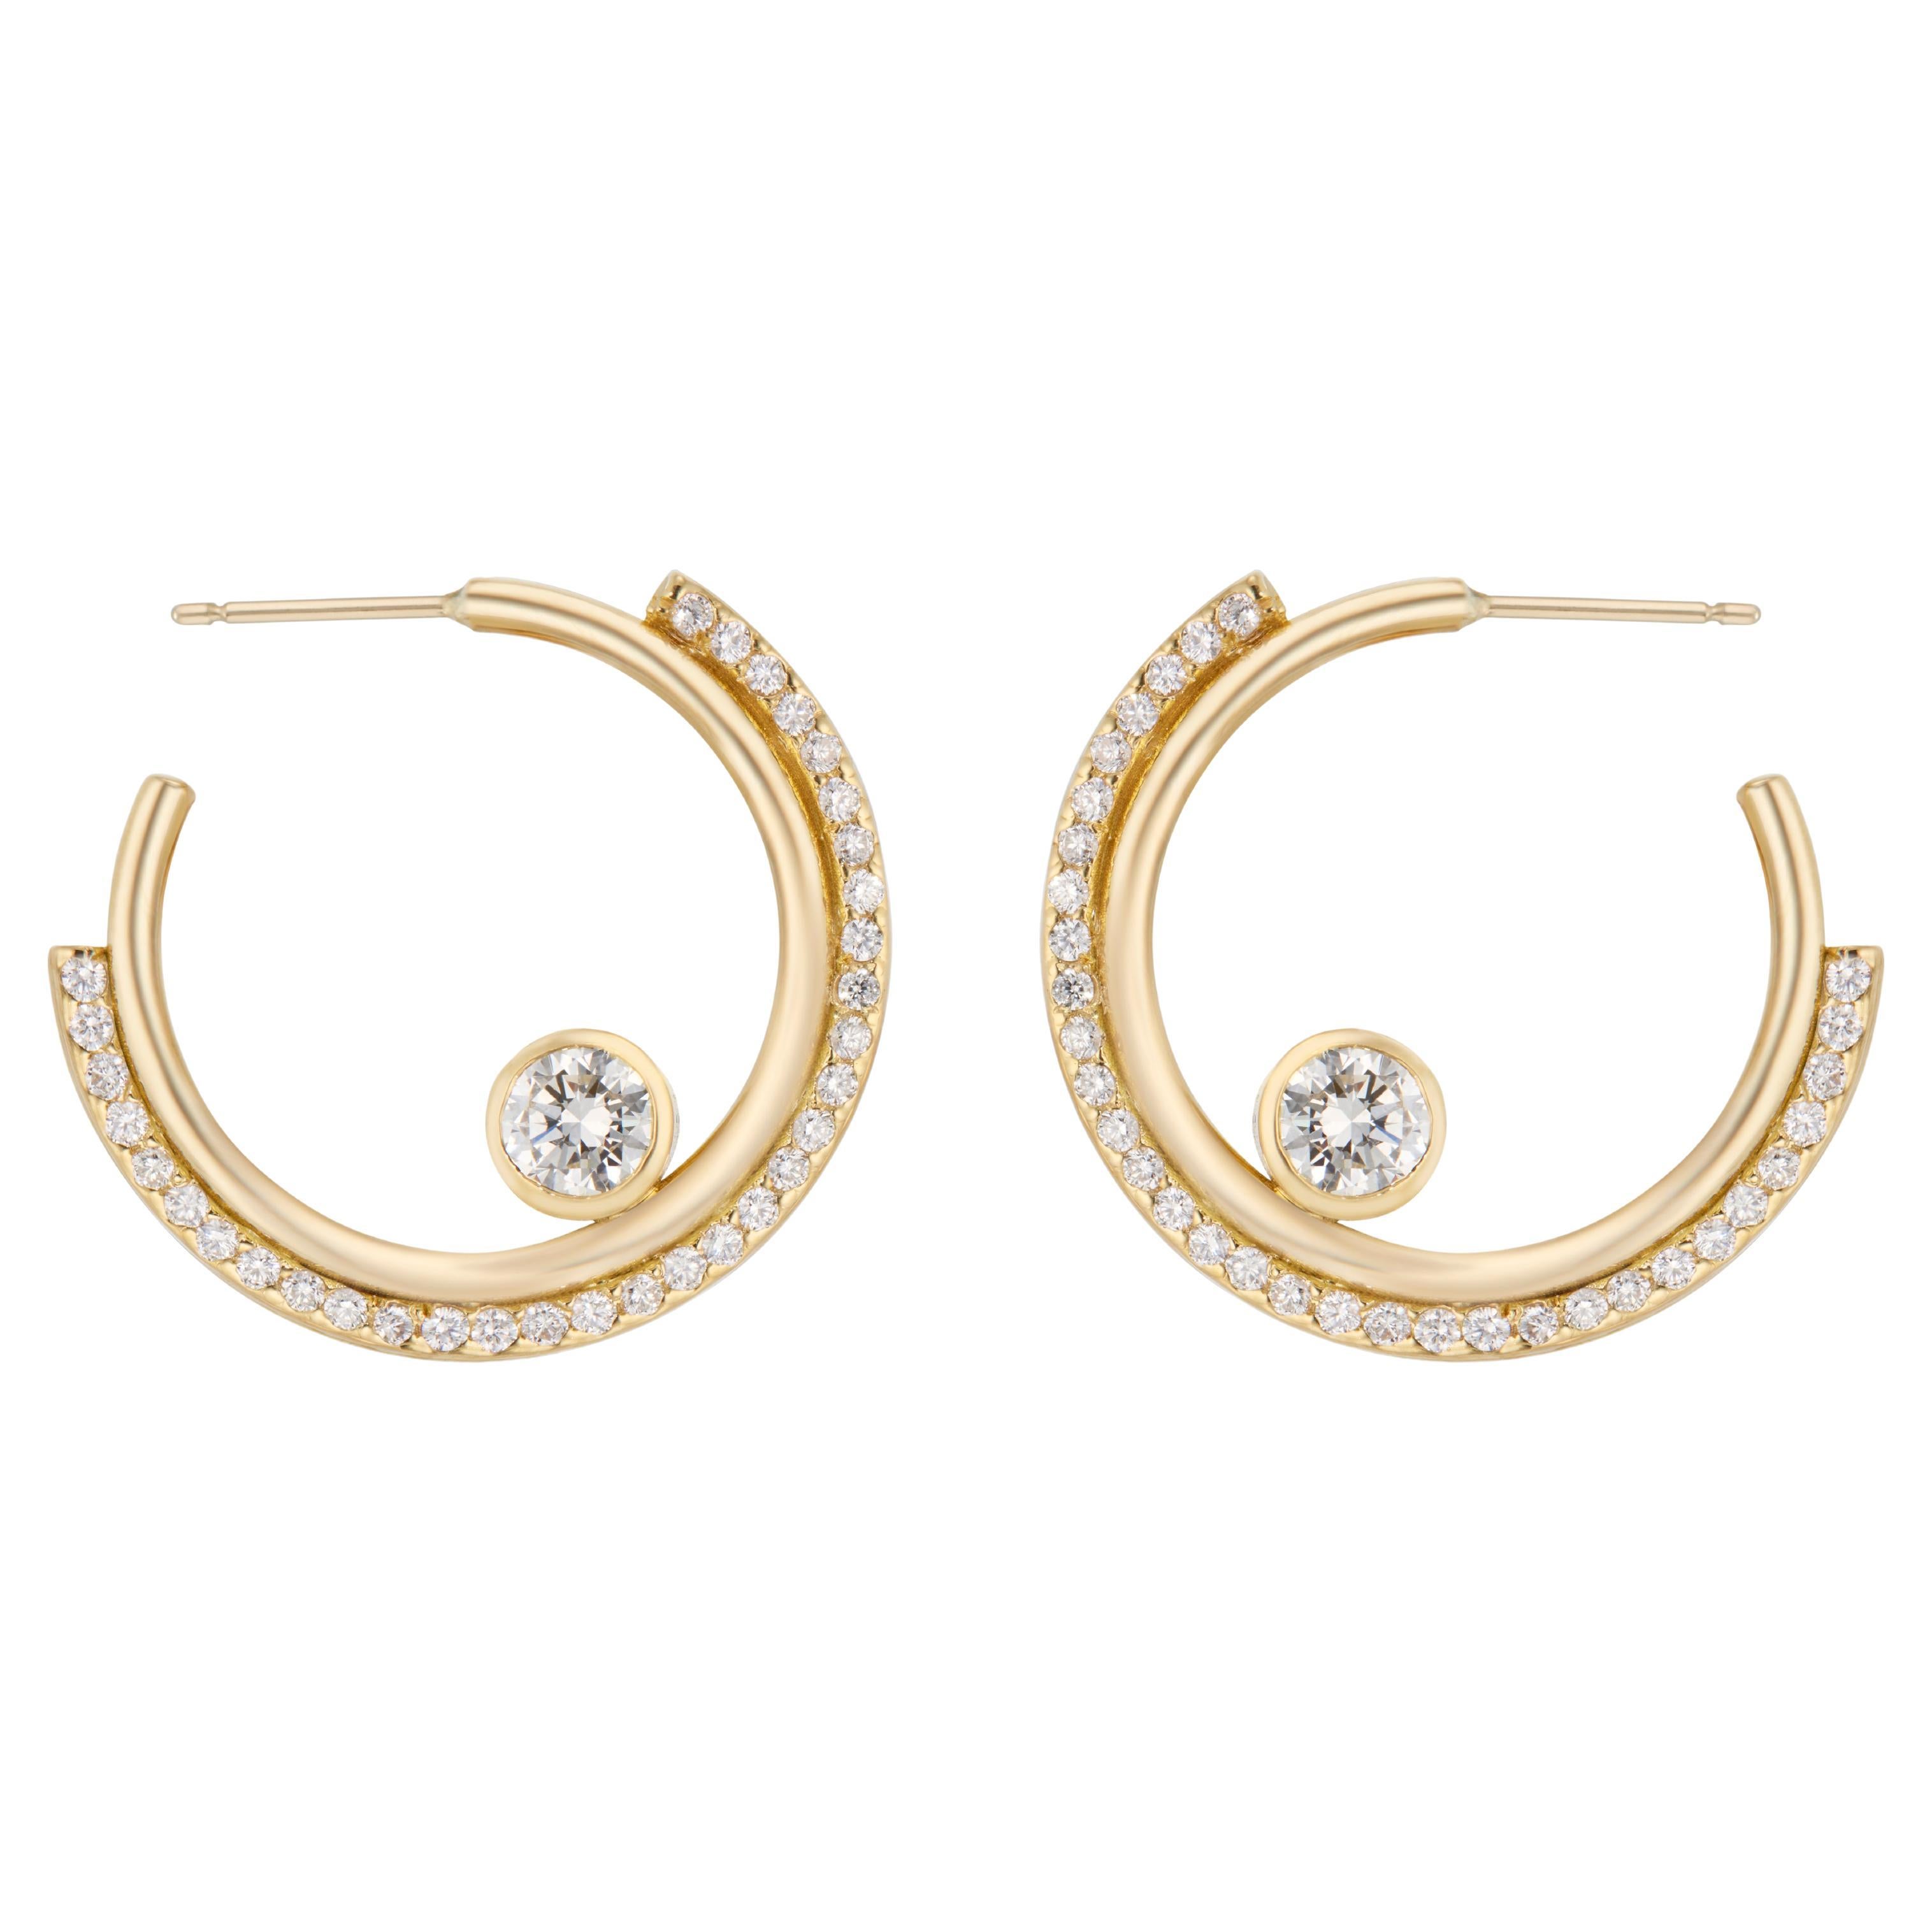 Casey Perez 18K Gold Arc Hoops with ribbed detail and 1.83 carats of Diamonds